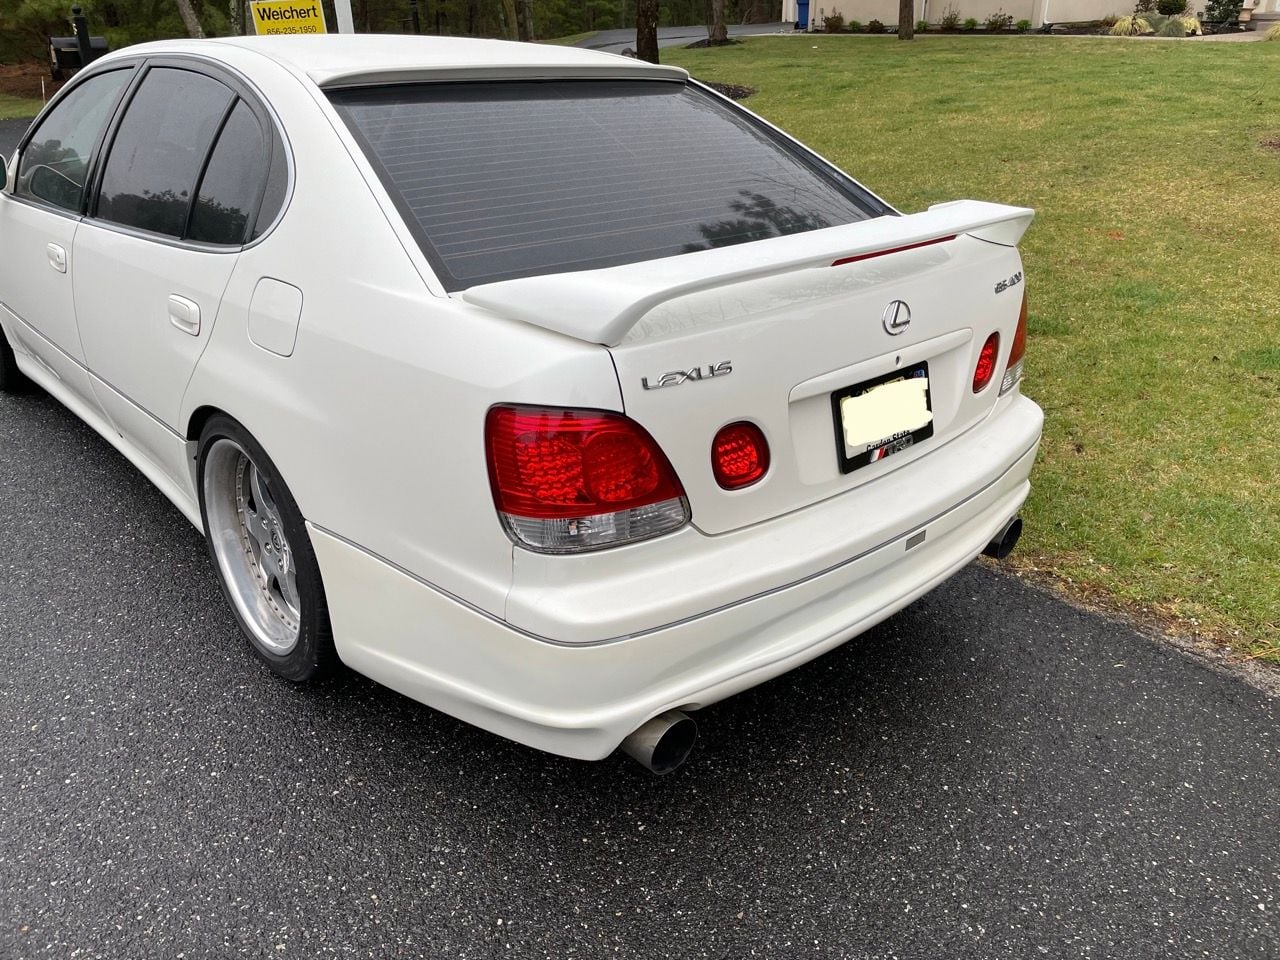 1999 Lexus GS400 - '99 GS400, White/Tan inter, 175K miles, heavily modded & maintained - Used - VIN JT8BH68X0X0017153 - 175,000 Miles - 8 cyl - 2WD - Automatic - Sedan - White - Marlton, NJ 08053, United States